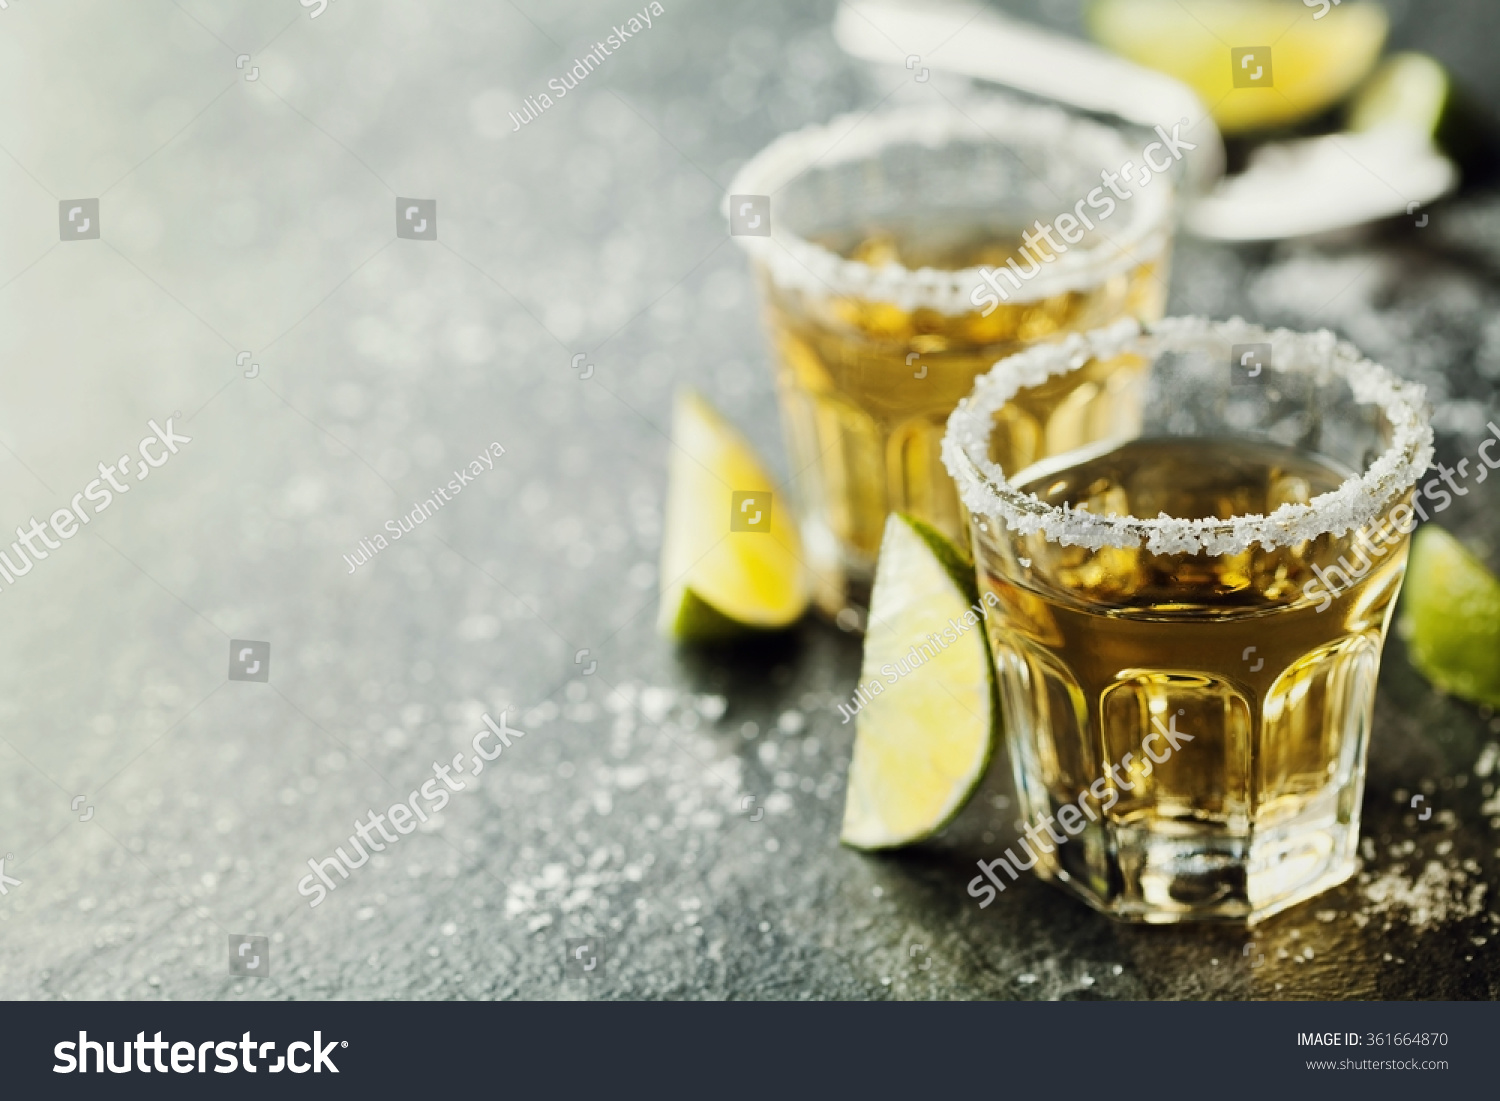 Tequila shot with lime and sea salt on black table, selective focus #361664870